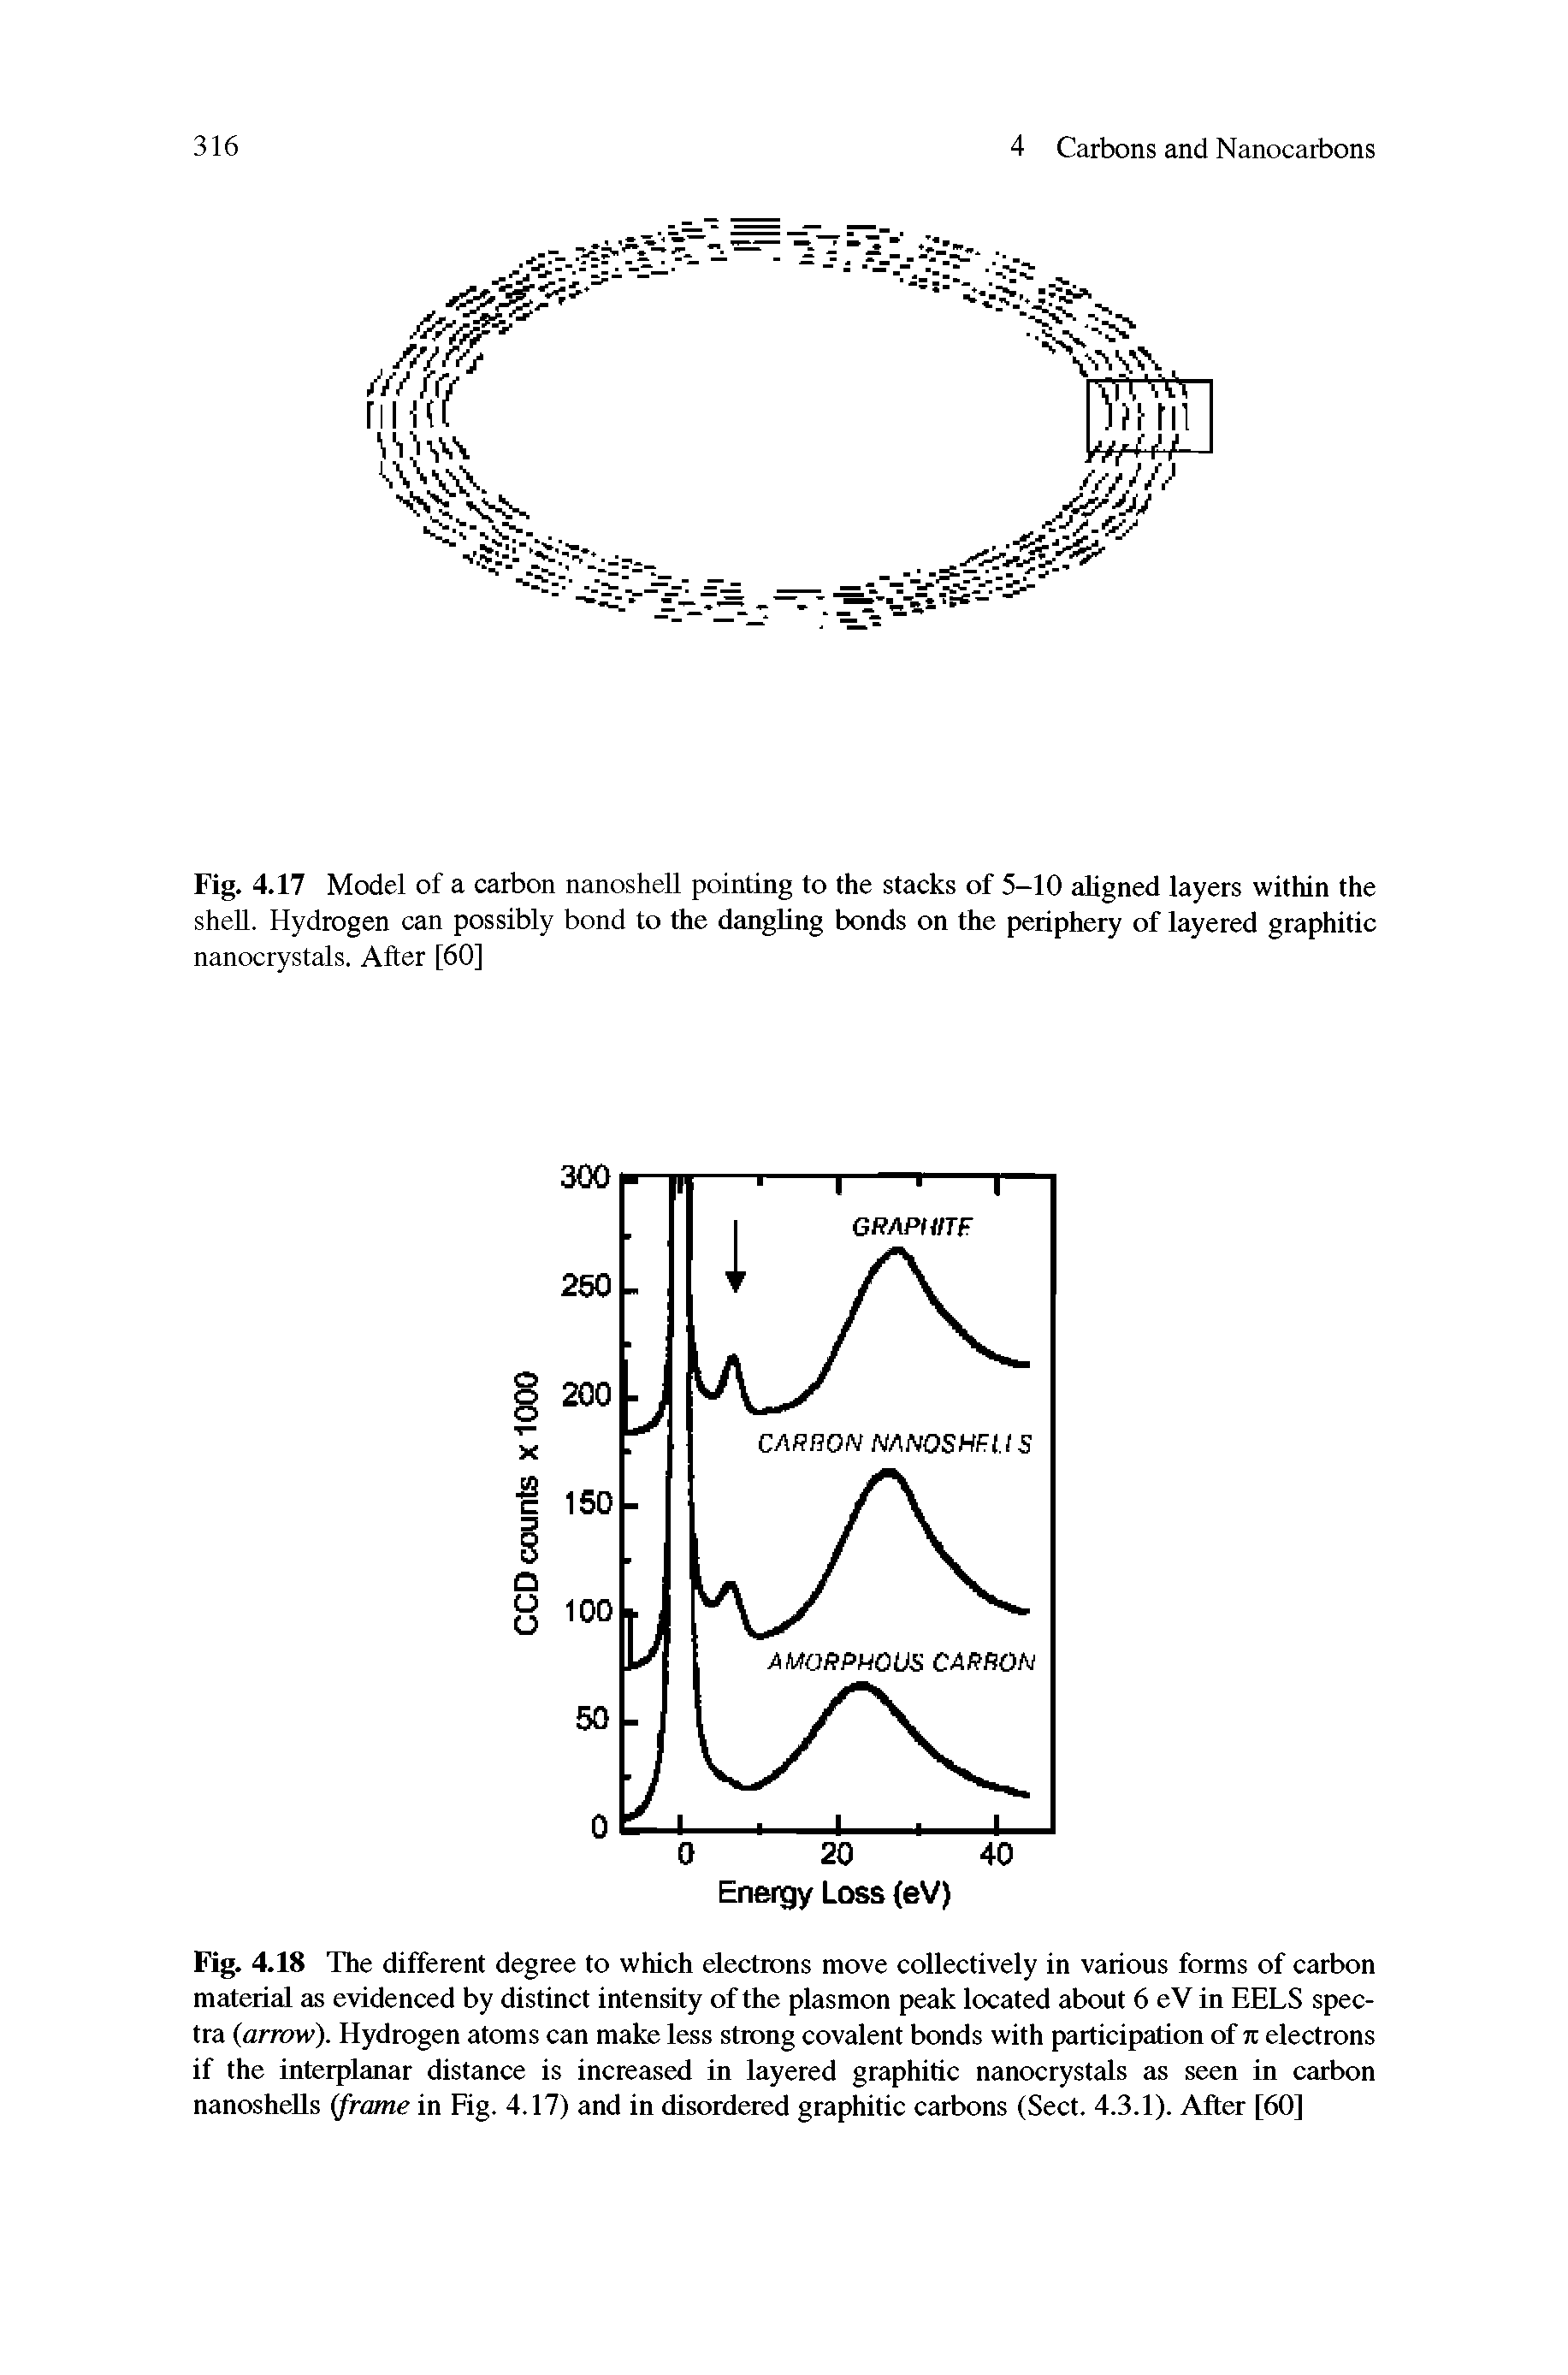 Fig. 4.18 The different degree to which electrons move collectively in various forms of carbon material as evidenced by distinct intensity of the plasmon peak located about 6 eV in EELS spectra (arrow). Hydrogen atoms can make less strong covalent bonds with participation of n electrons if the interplanar distance is increased in layered graphitic nanocrystals as seen in carbon nanosheUs (frame in Fig. 4.17) and in disordered graphitic carbons (Sect. 4.3.1). After [60]...